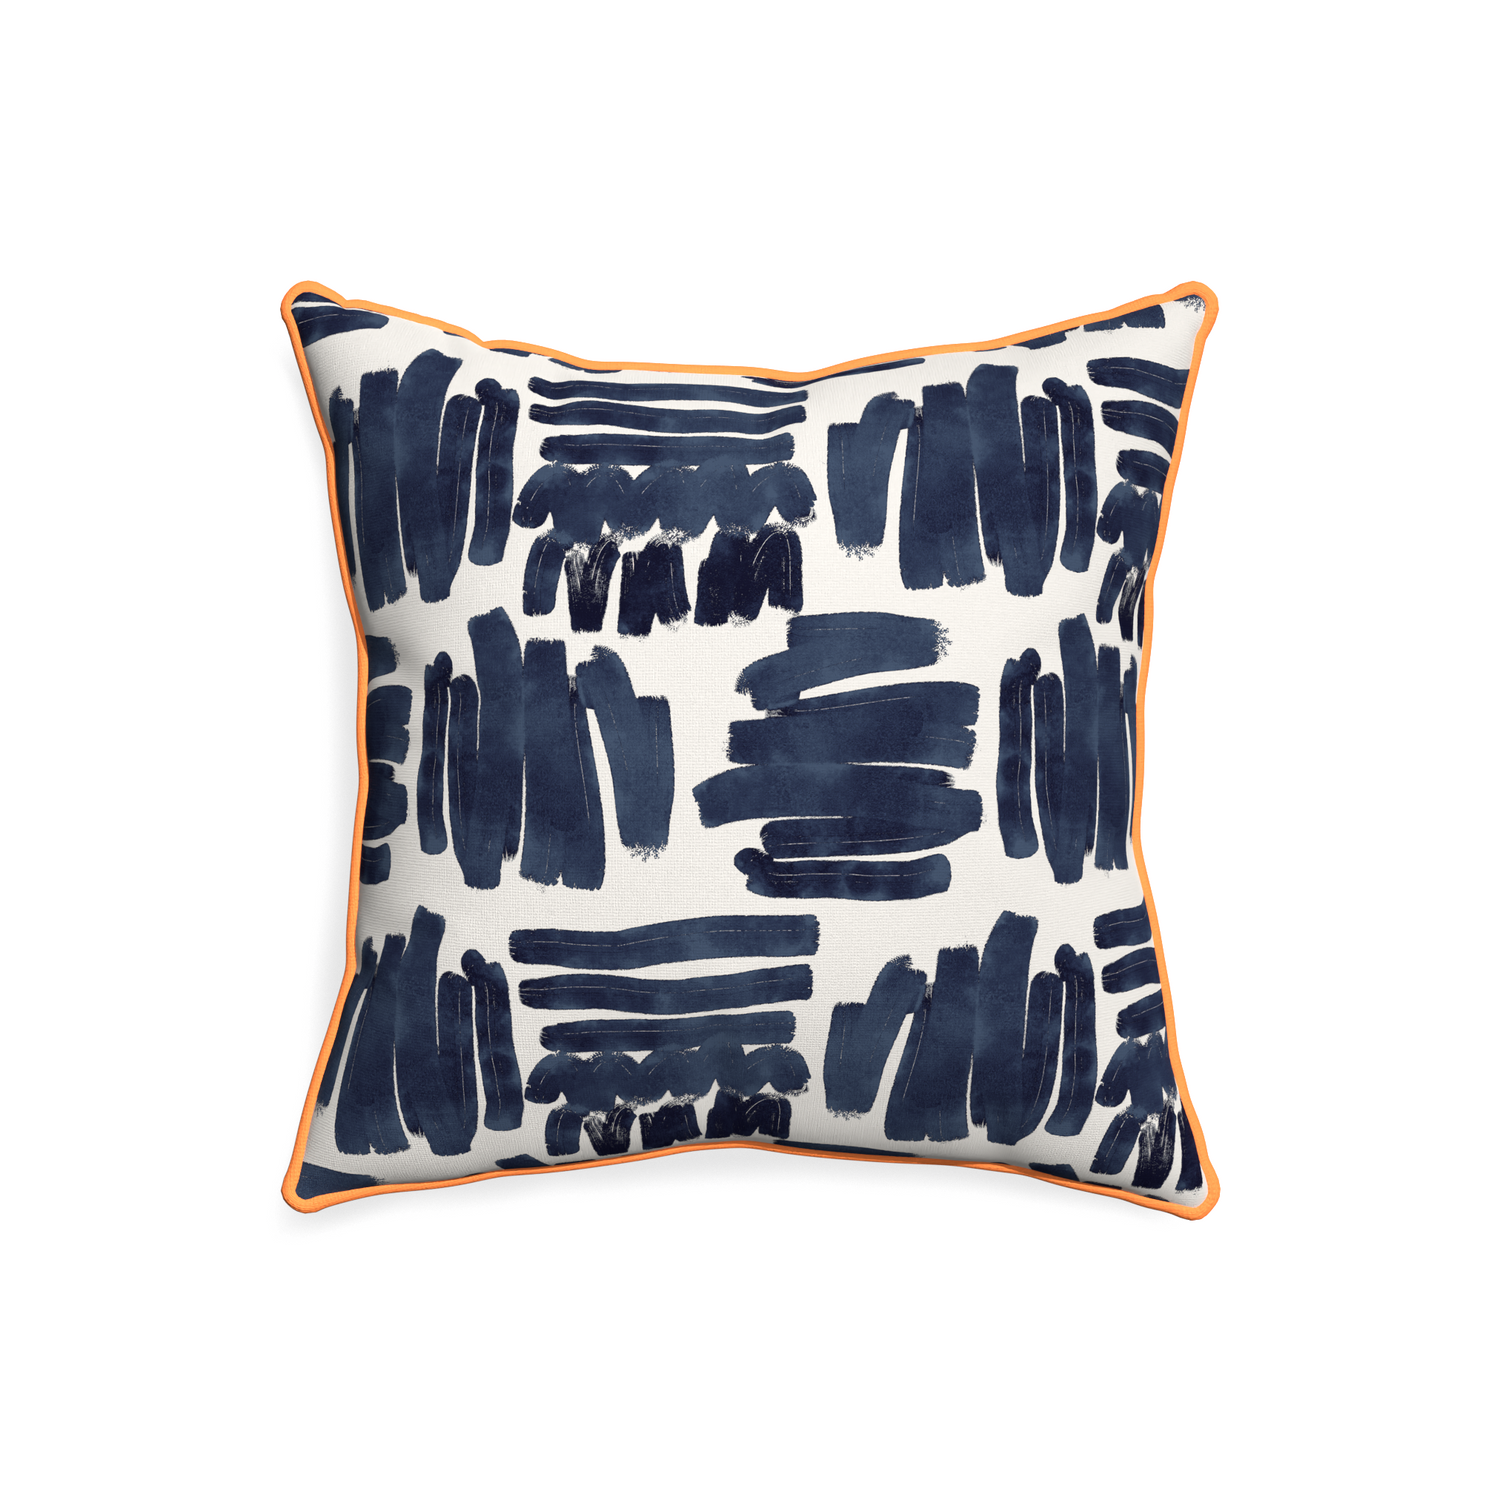 20-square warby custom pillow with clementine piping on white background